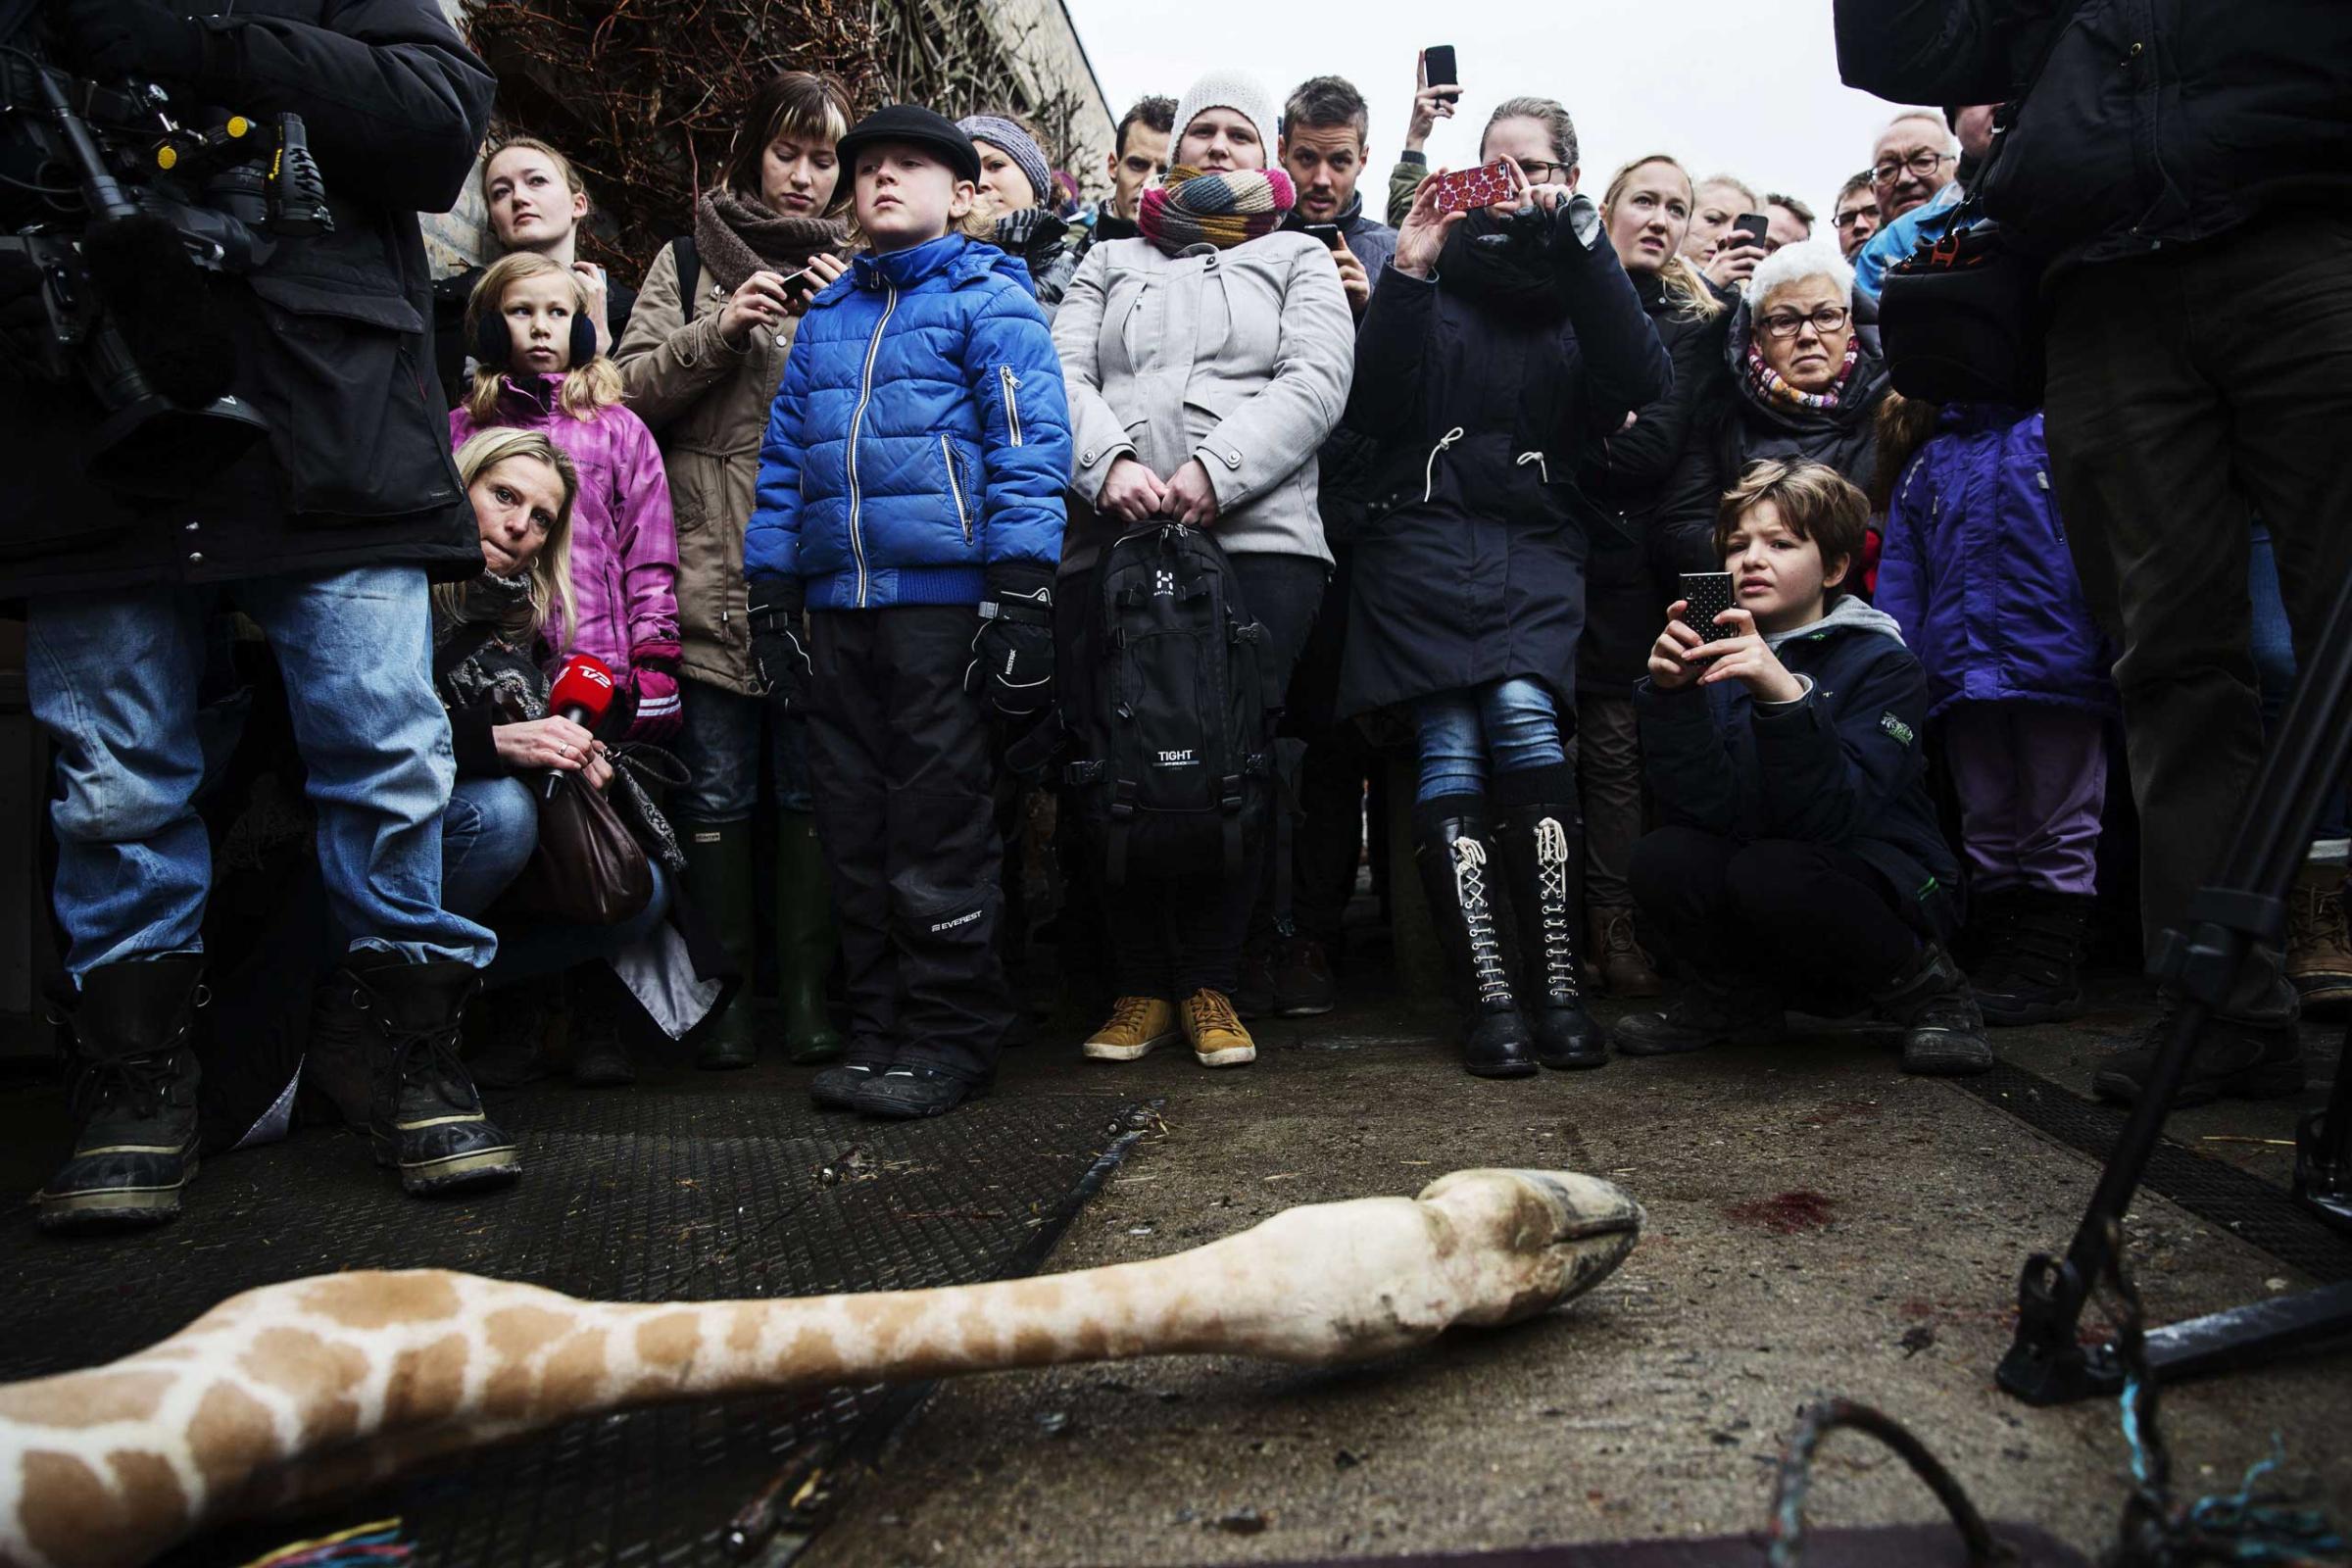 A young giraffe named Marius was shot dead and autopsied in the presence of visitors to the gardens at Copenhagen Zoo, Feb. 9, 2014.